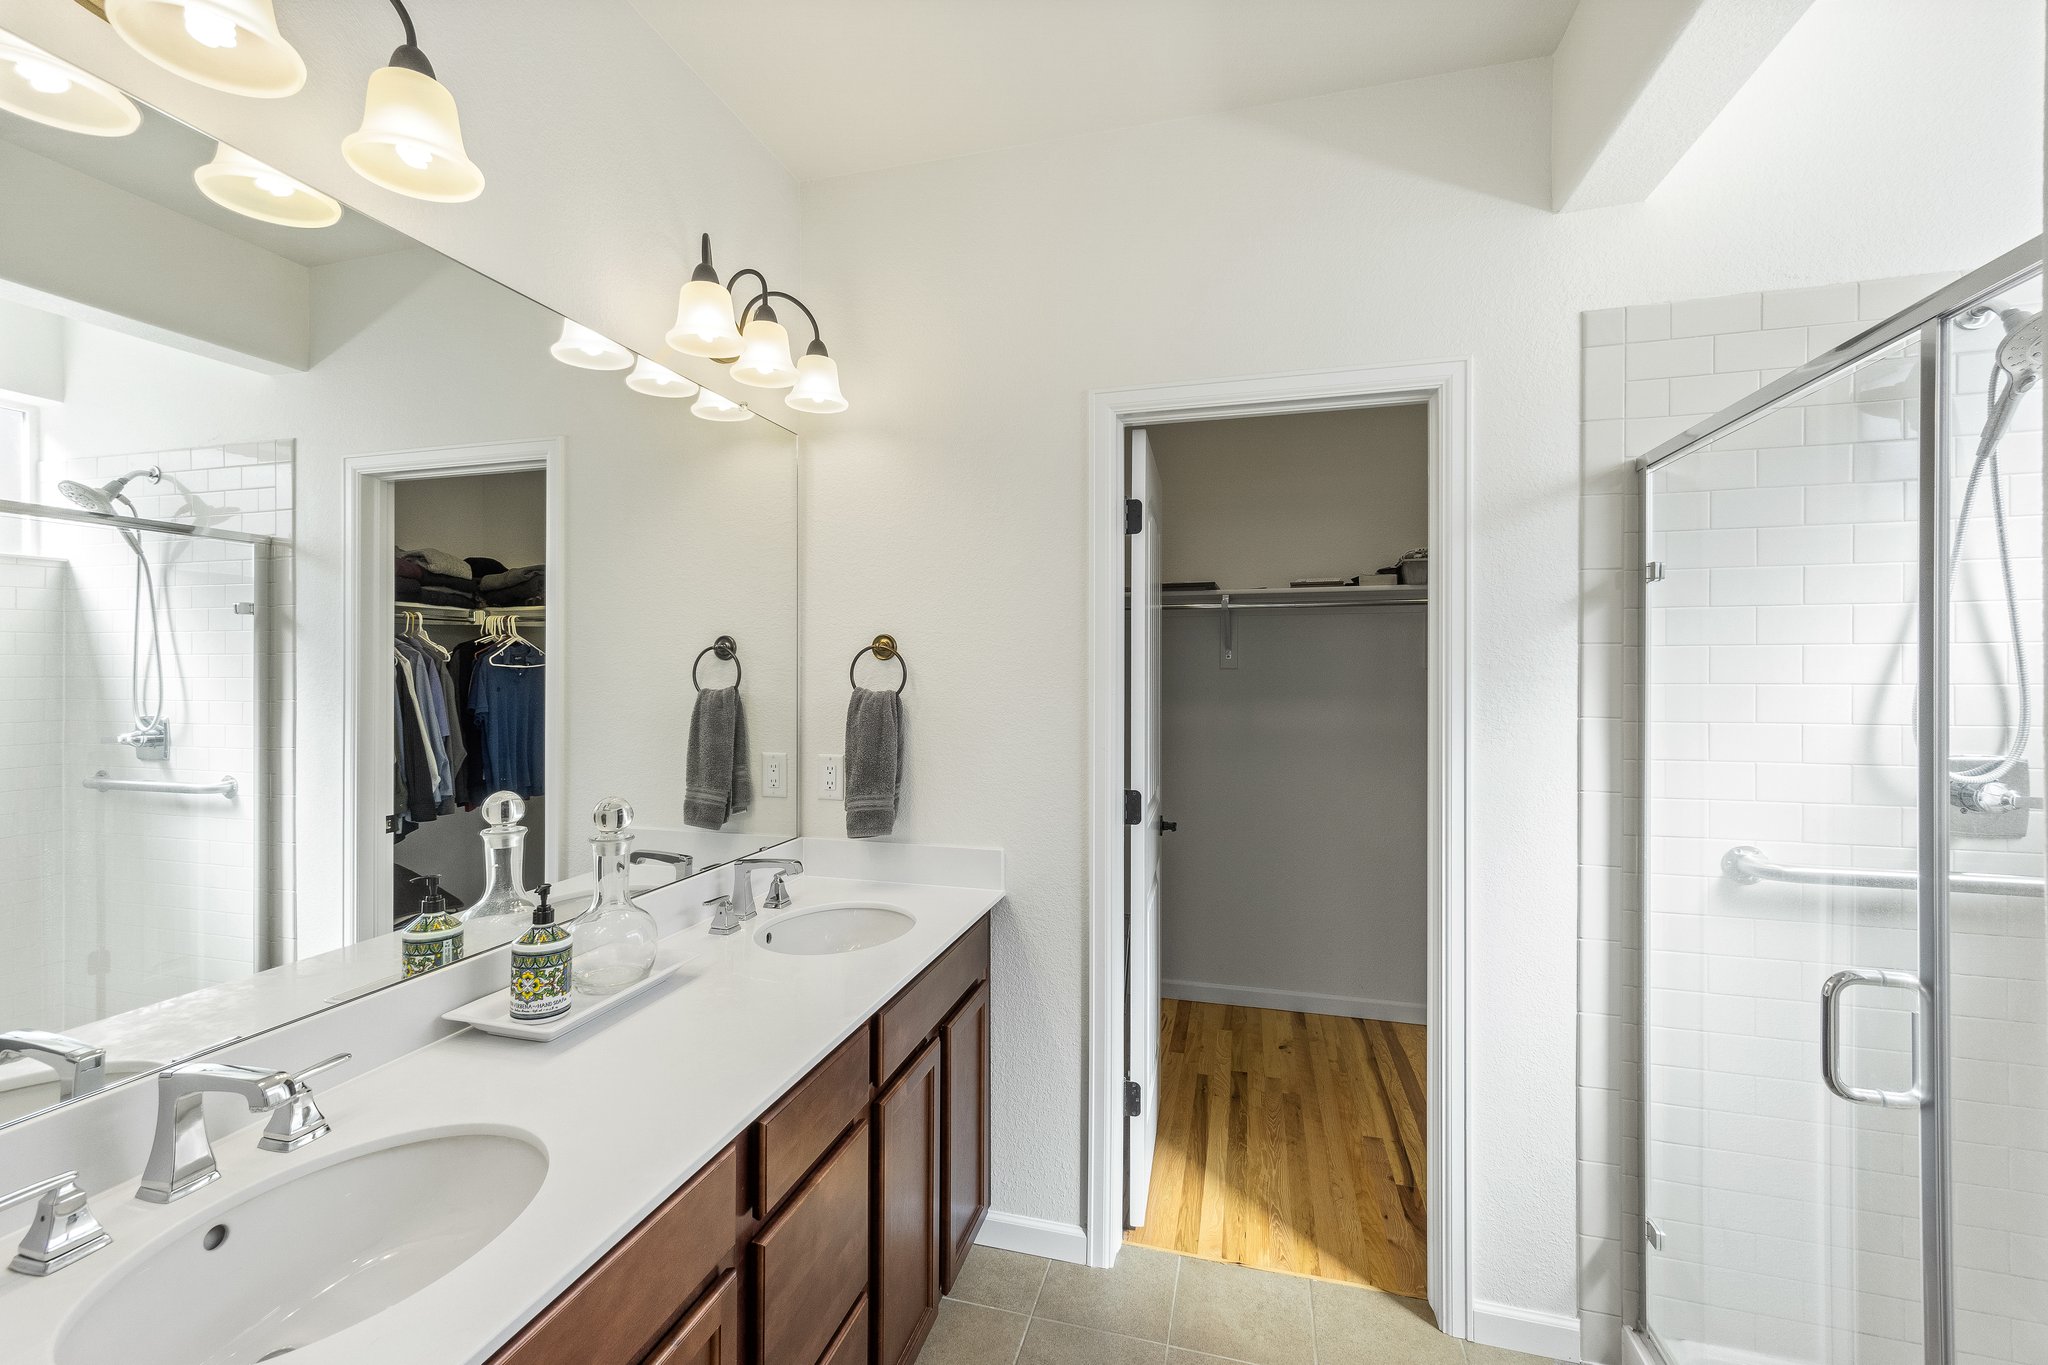 Double Sinks and 2 Walk in Closets